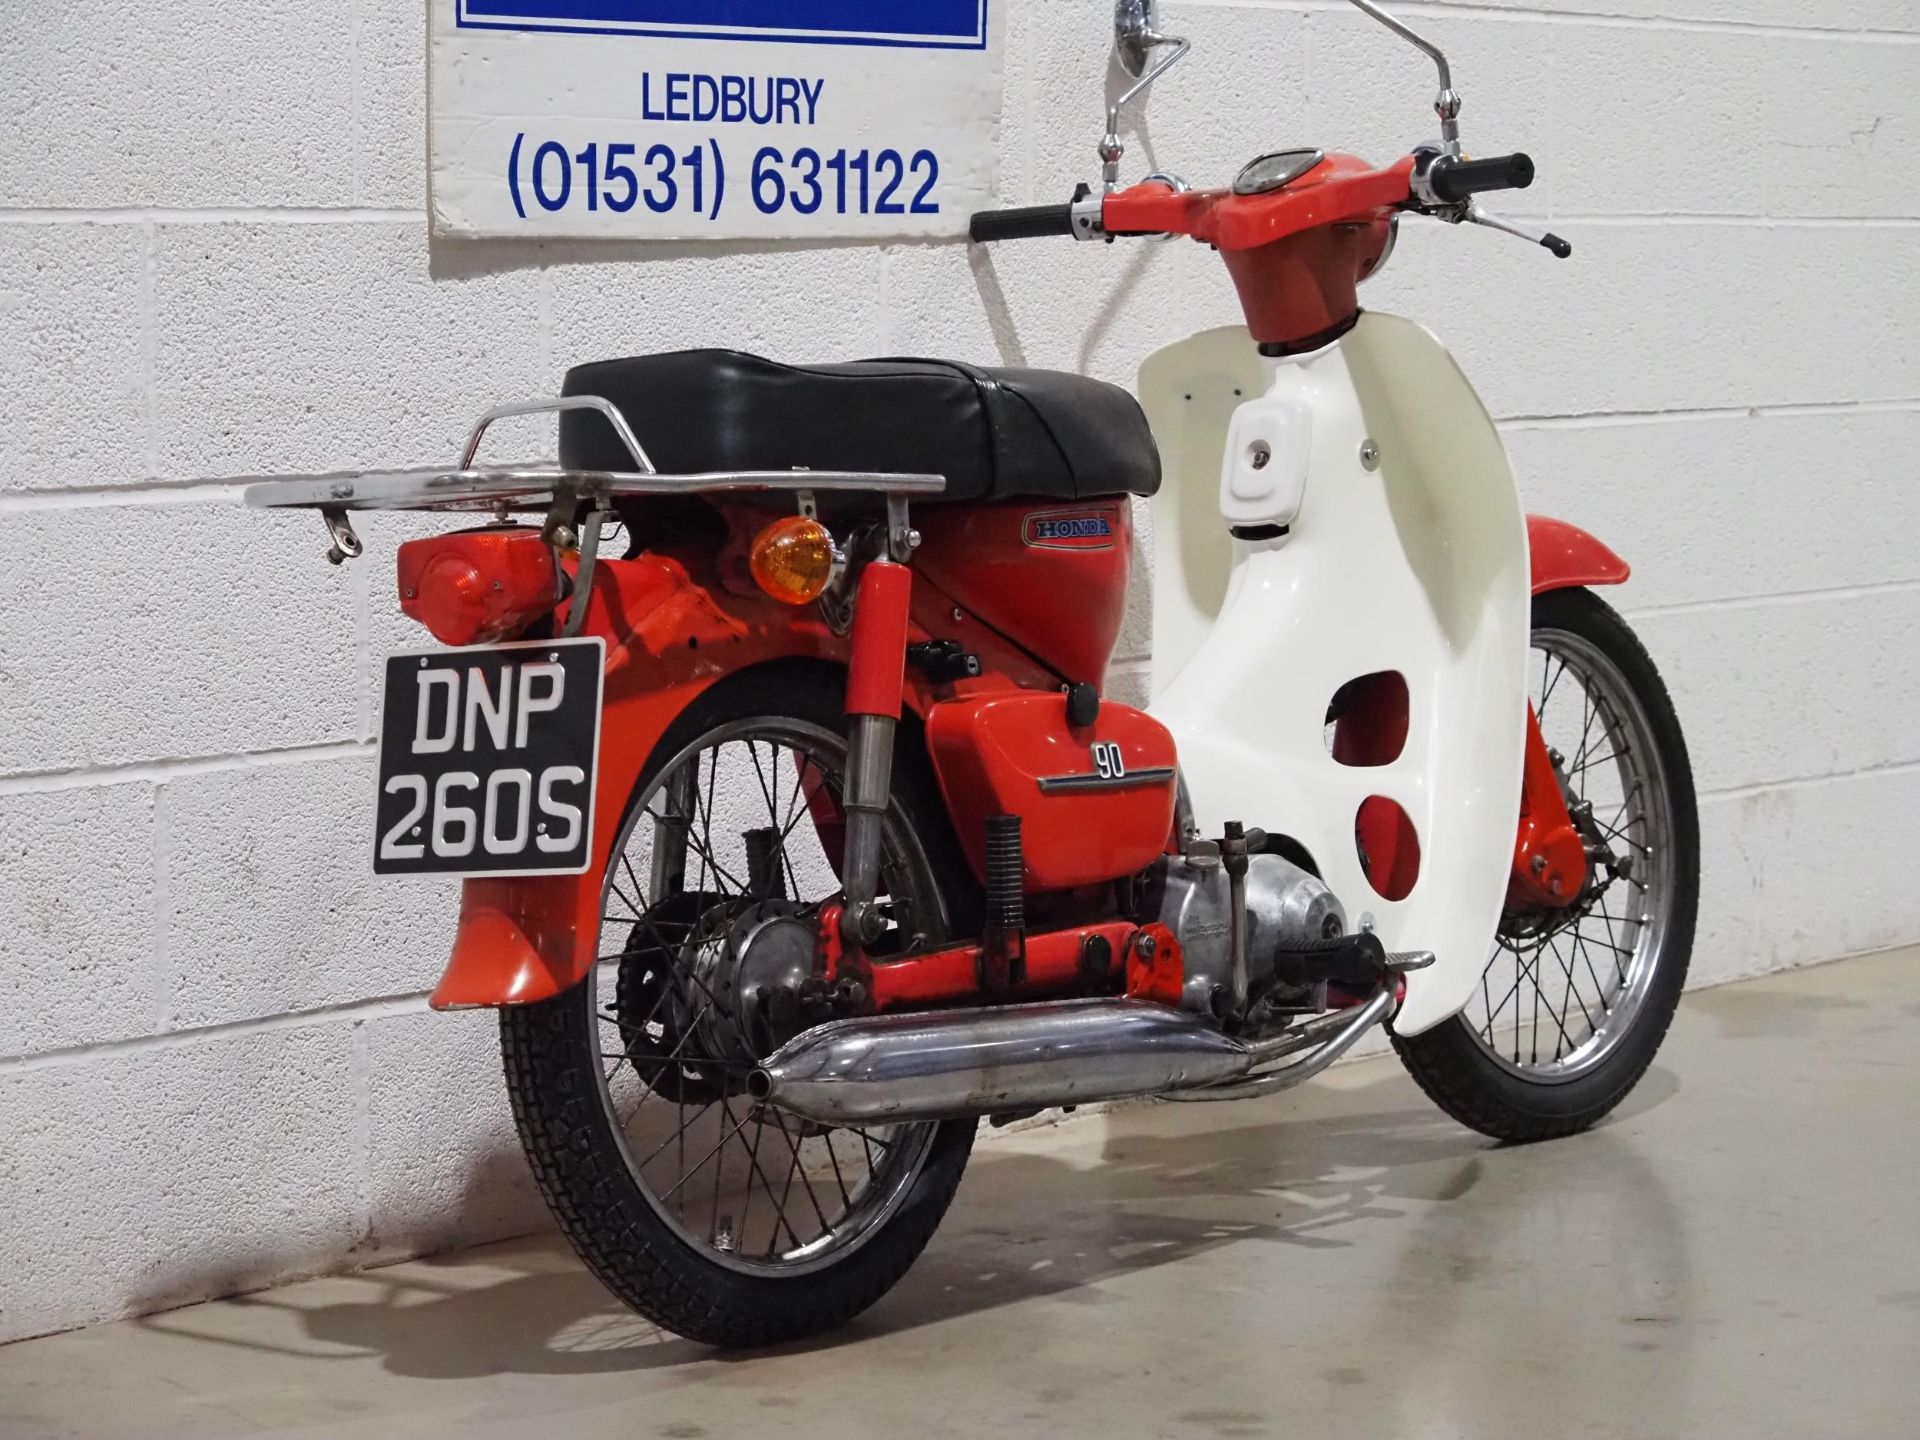 Honda C90 moped. 1977. 90cc. Runs but will need recommissioning as has been stored for some time and - Image 3 of 6